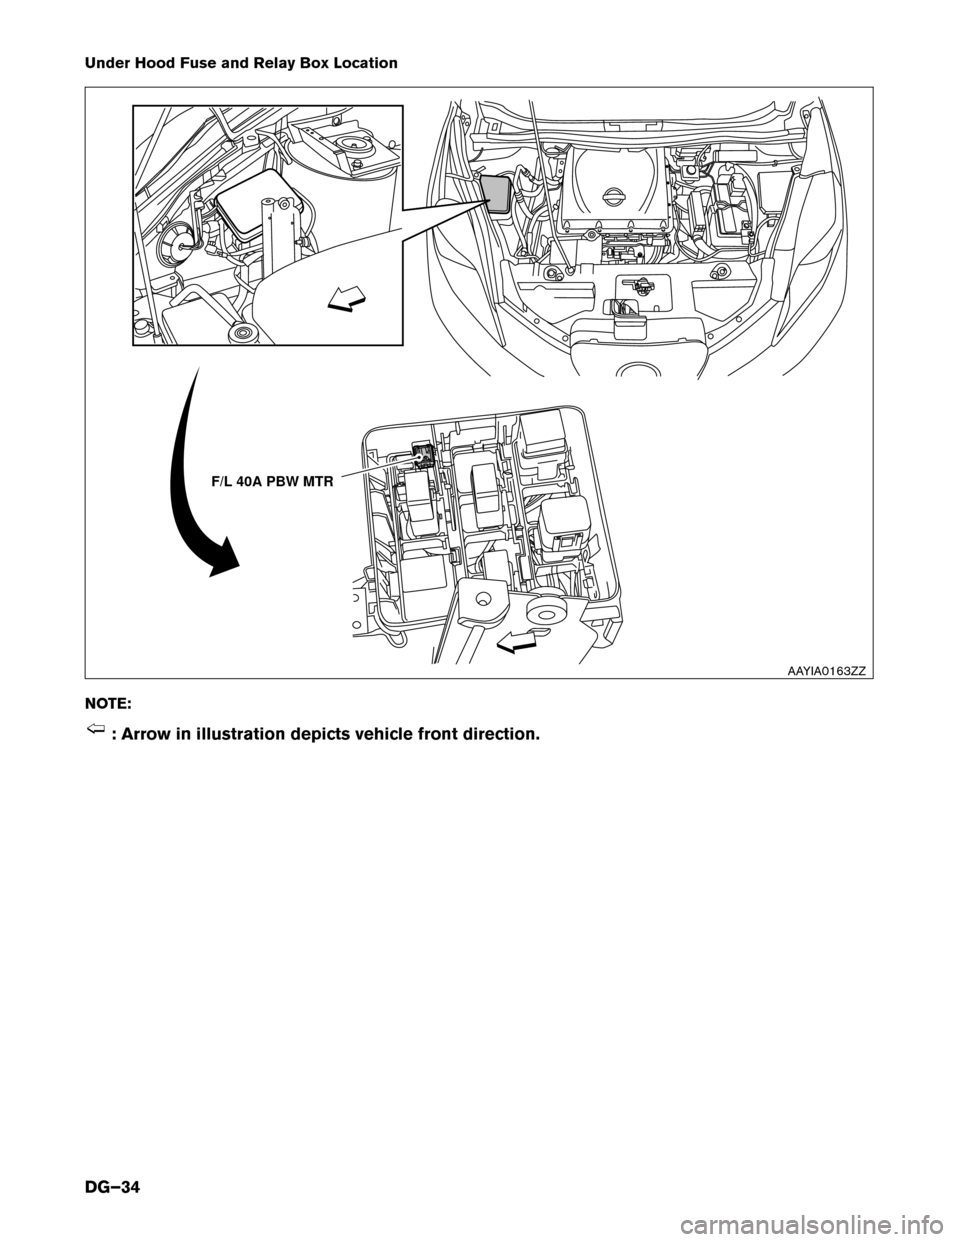 NISSAN LEAF 2016 1.G Dismantling Guide Under Hood Fuse and Relay Box Location
NO
TE: : Arrow in illustration depicts vehicle front direction. F/L 40A PBW MTR
AAYIA0163ZZ
DG–34 